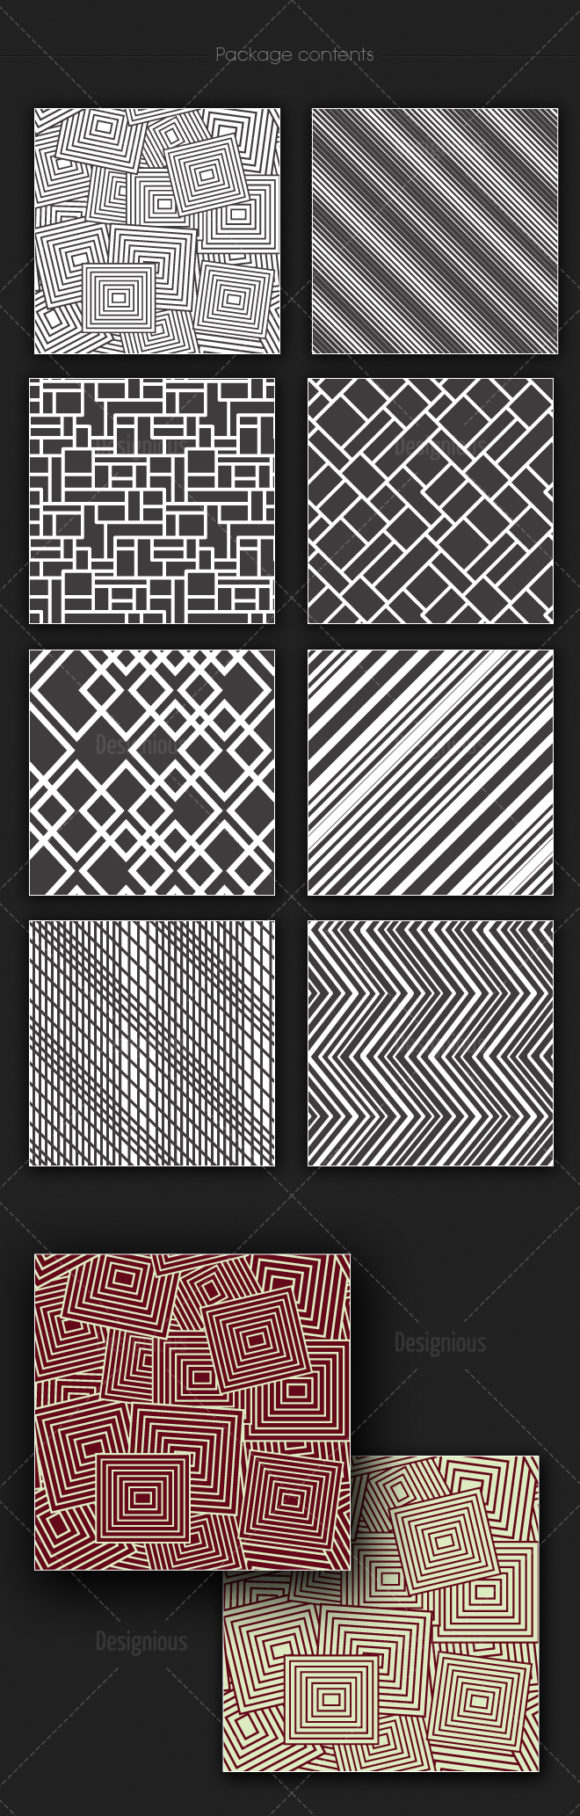 Seamless Patterns Vector Pack 162 2